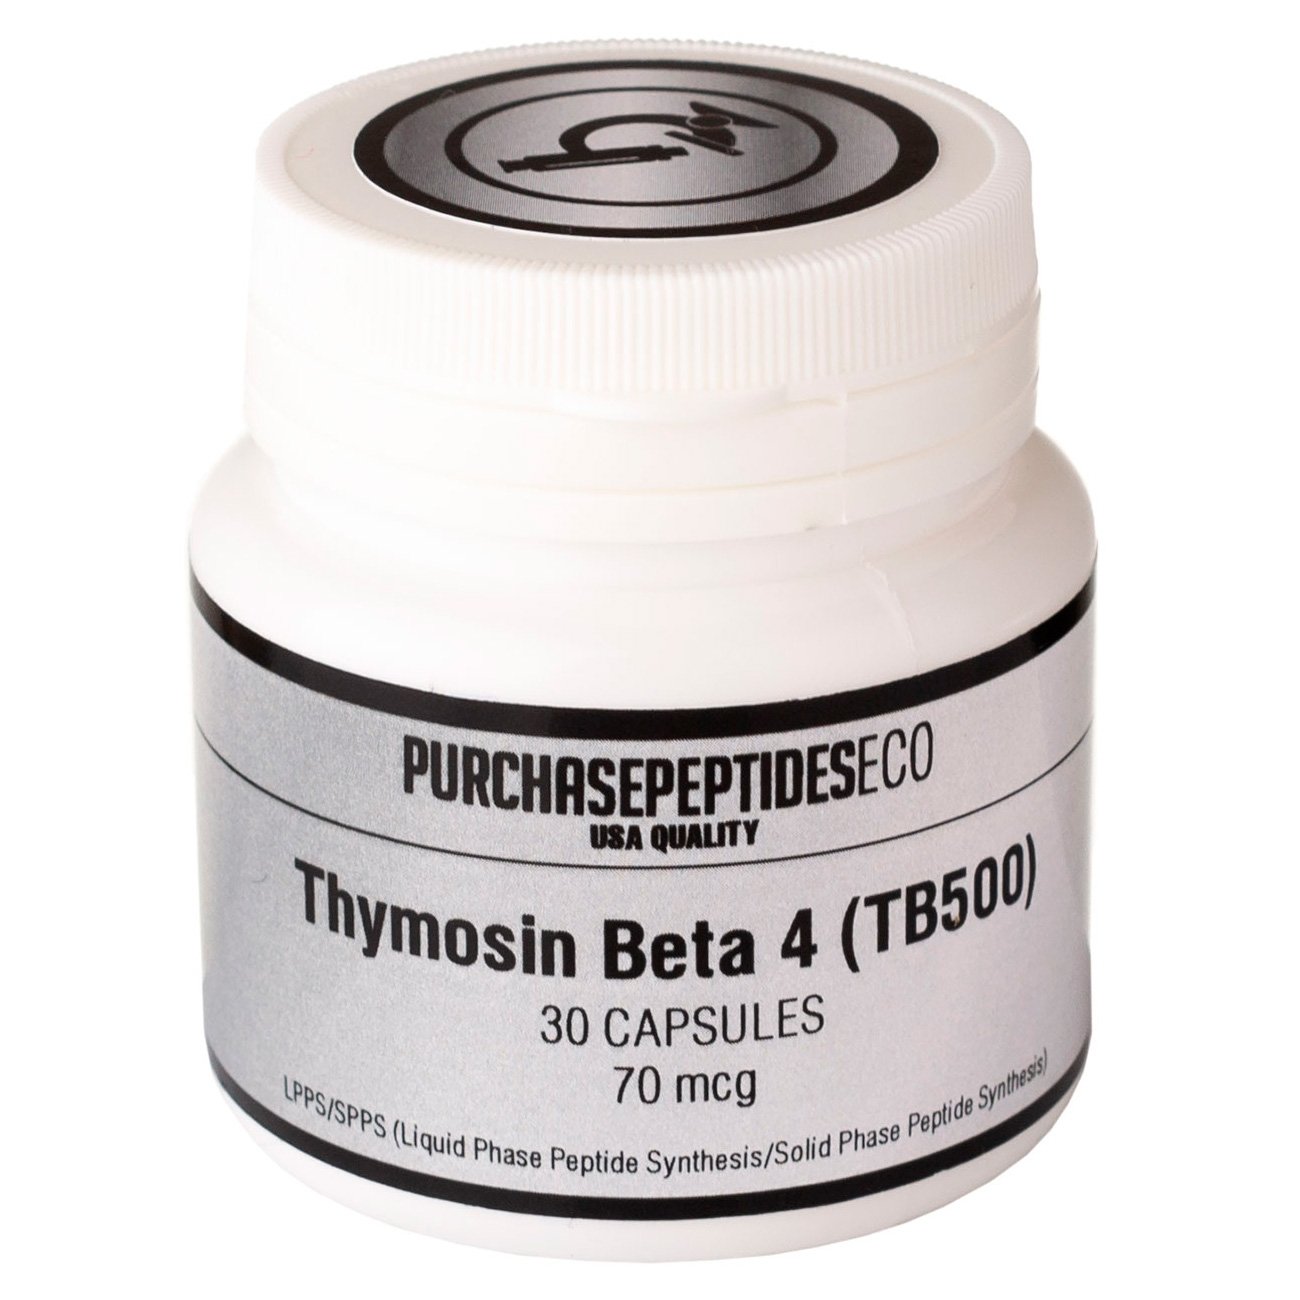 TB-500 капсулы,  ml, PurchasepeptidesEco. Peptides. 